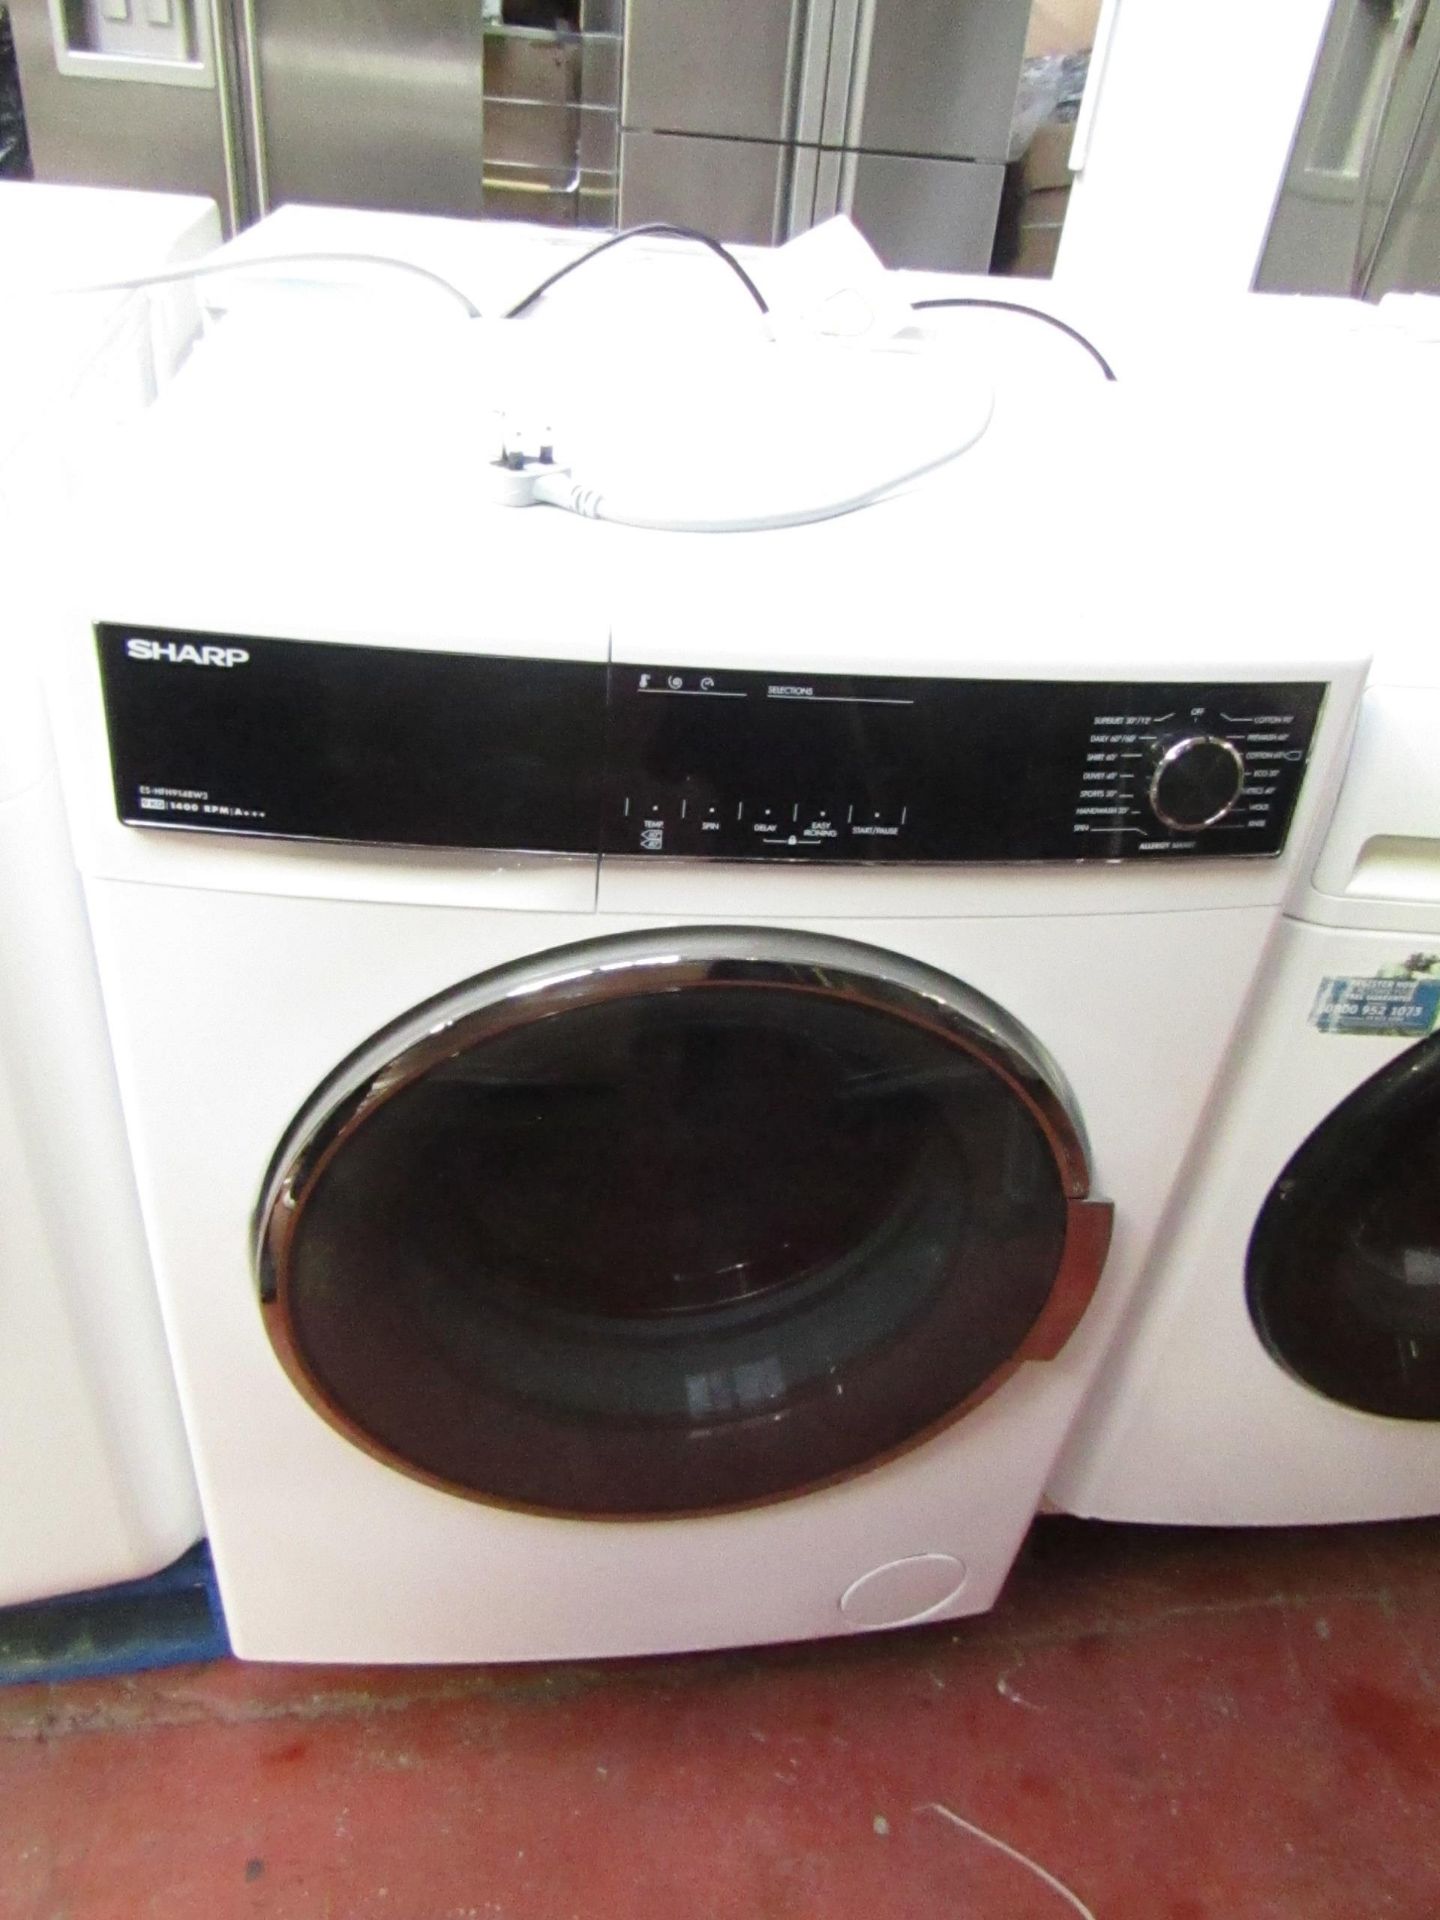 Sharp EFS-HFH9148W3 washing machine, powers on and spins.